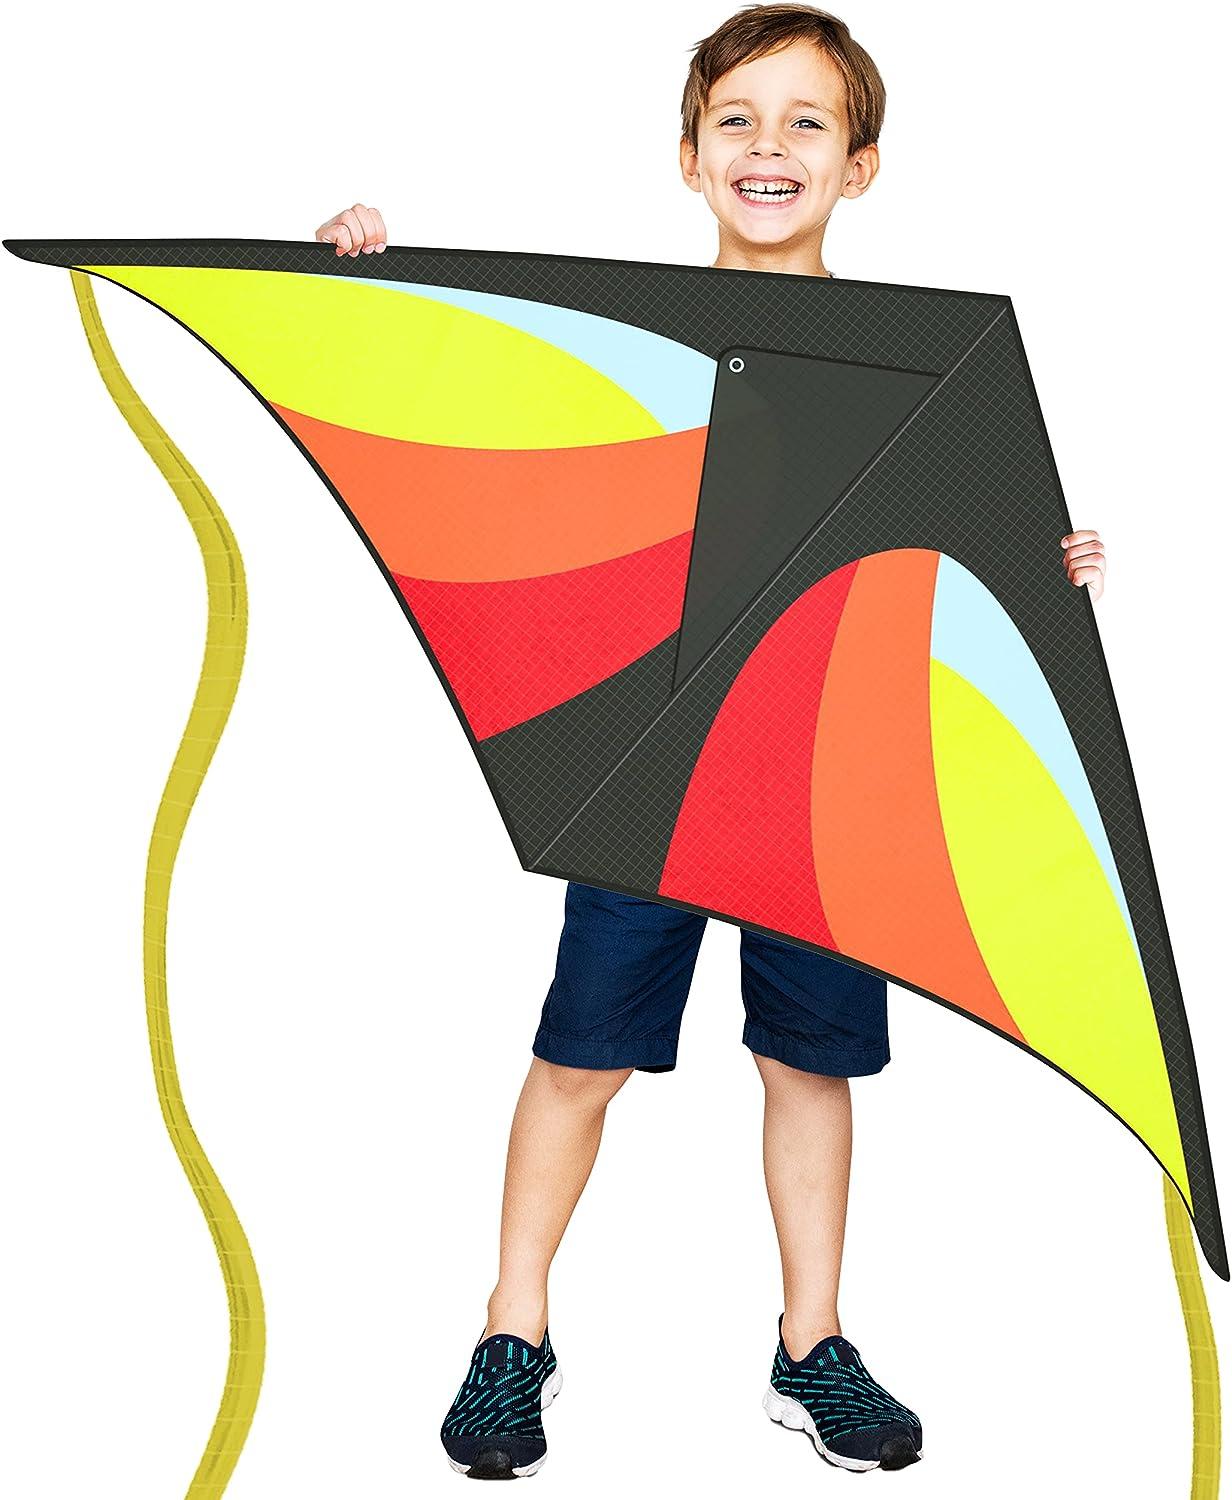 KITEDRONE Deltawing Performance Kite Toy for Kids - LOL Surprise  #LETSBEFRIENDS - 200 Feet Fying Line and Spool